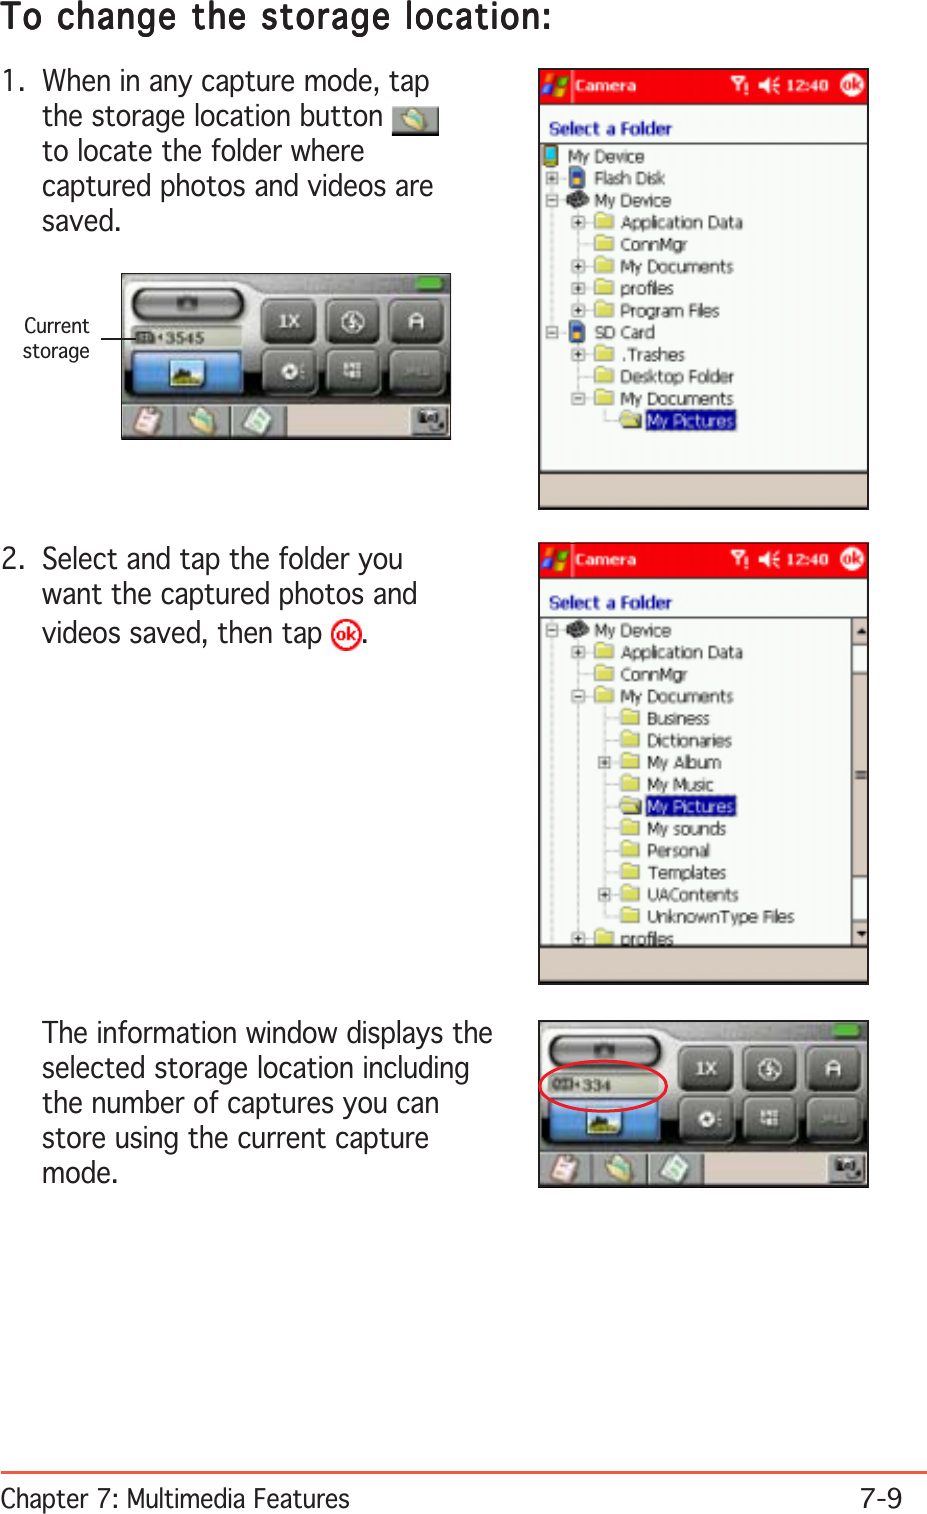 Chapter 7: Multimedia Features7-9To change the storage location:To change the storage location:To change the storage location:To change the storage location:To change the storage location:1. When in any capture mode, tapthe storage location button to locate the folder wherecaptured photos and videos aresaved.The information window displays theselected storage location includingthe number of captures you canstore using the current capturemode.2. Select and tap the folder youwant the captured photos andvideos saved, then tap  .Currentstorage